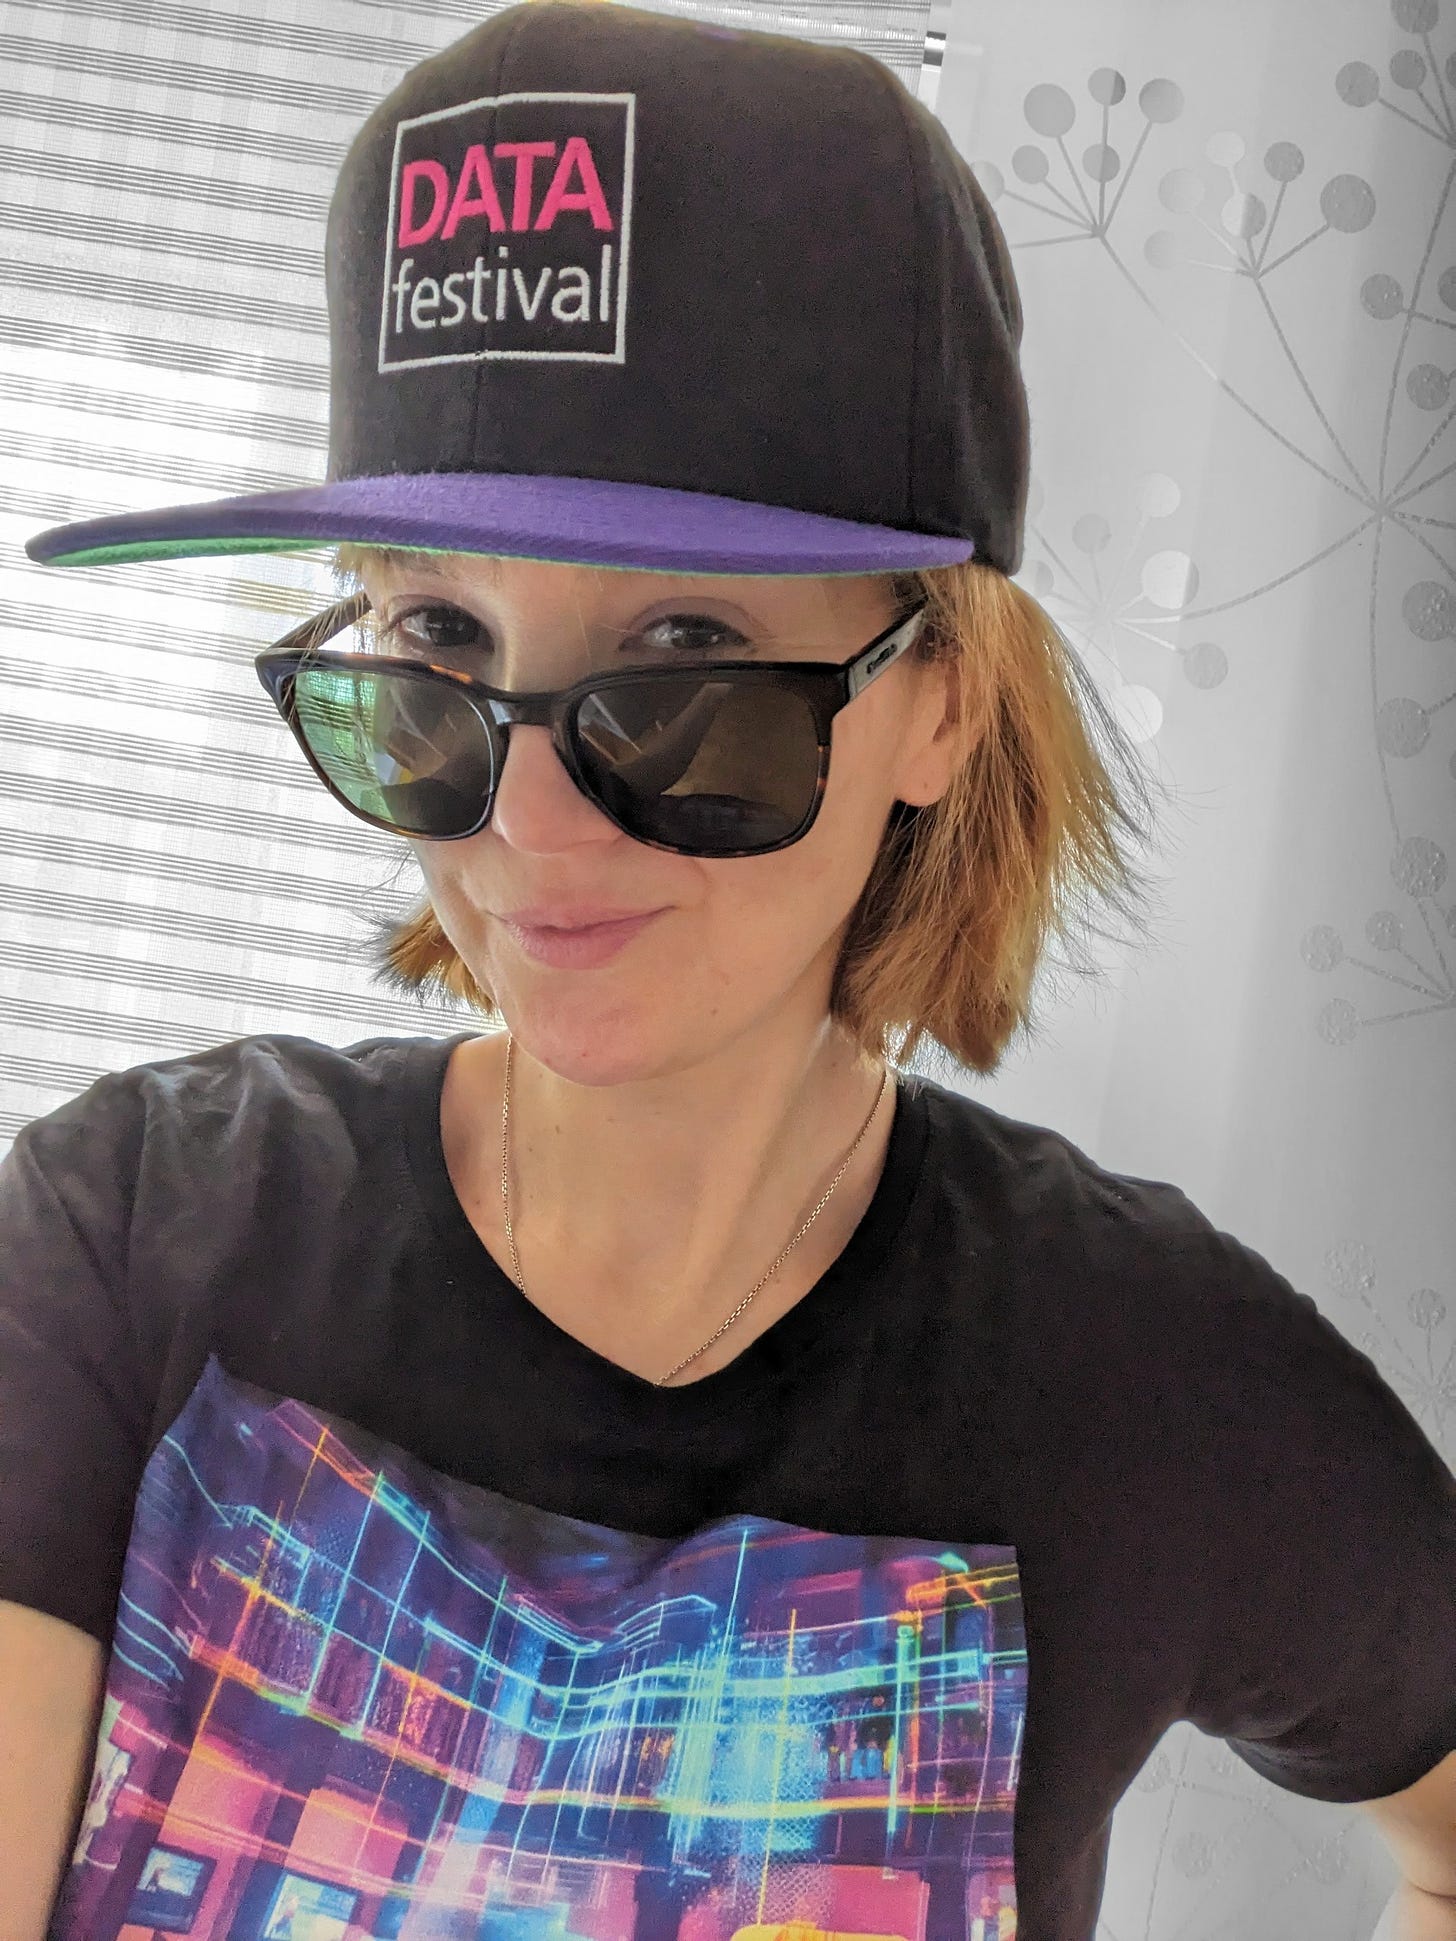 Andrea Weichand im Data Festival Outfit